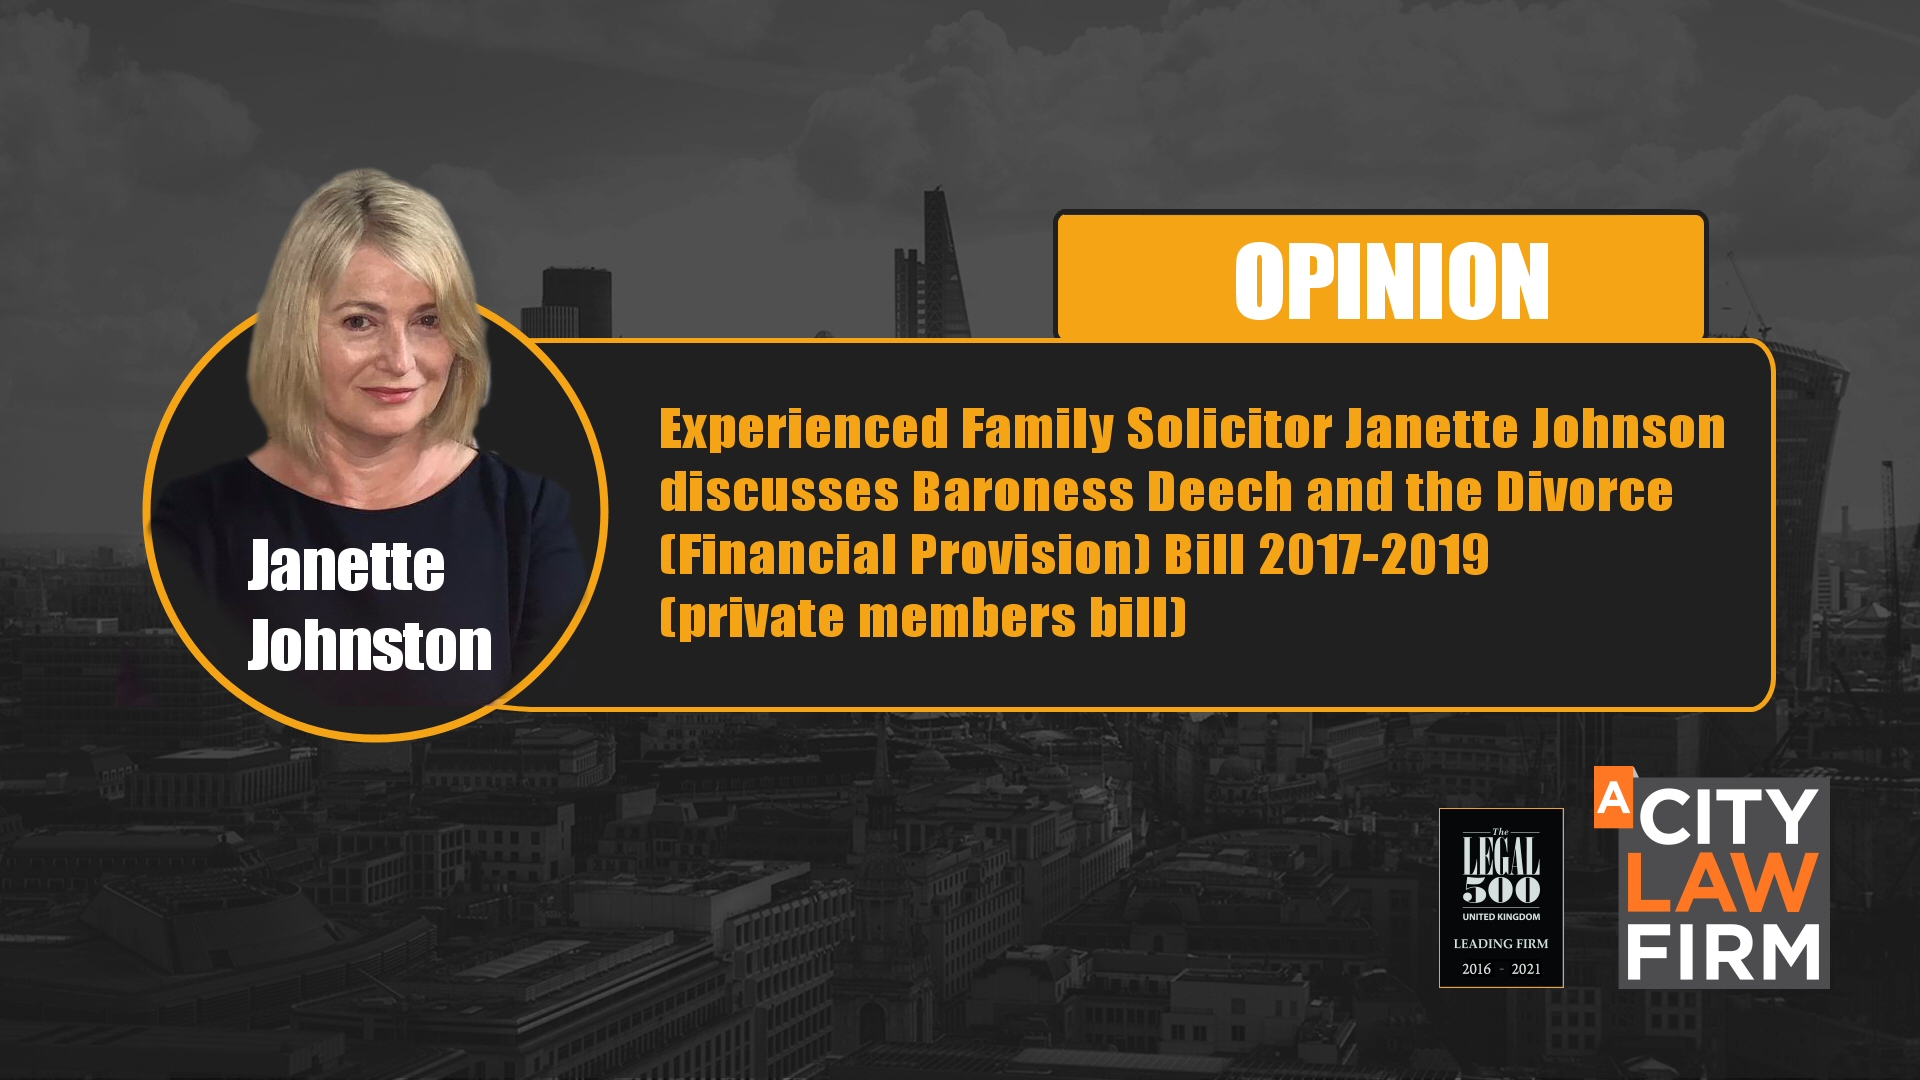 Experienced Family Solicitor Janette Johnson discusses Baroness Deech and the Divorce (Financial Provision) Bill 2017-2019 (private members bill)